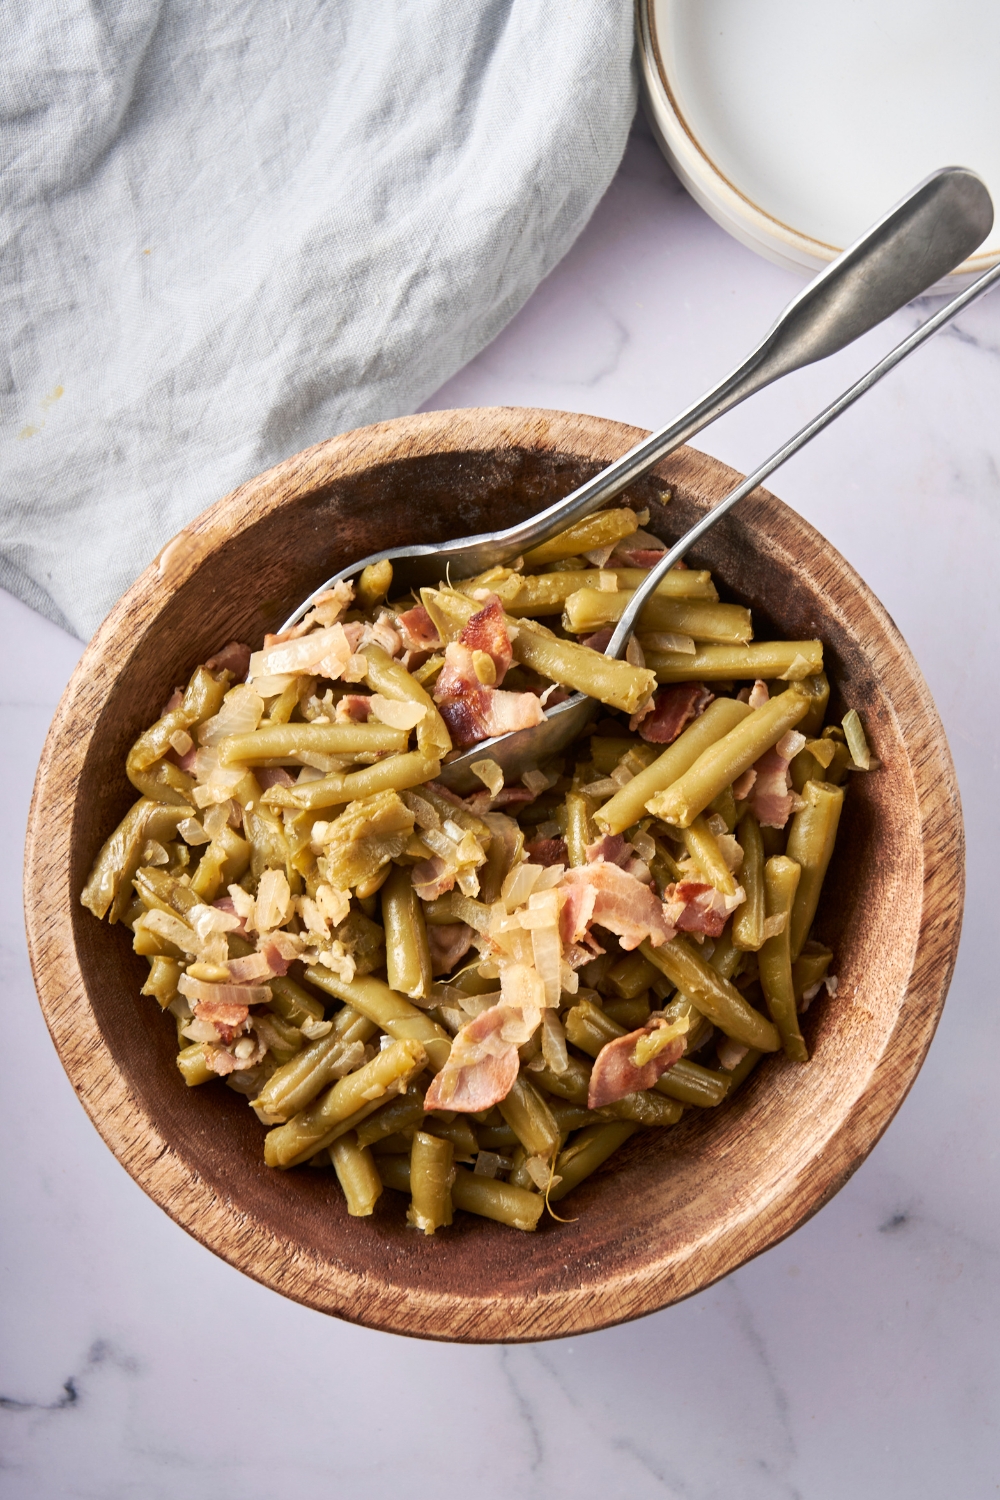 A large wooden bowl full of green beans and bacon on a white counter. Serving fork and spoon are resting on the bowl.